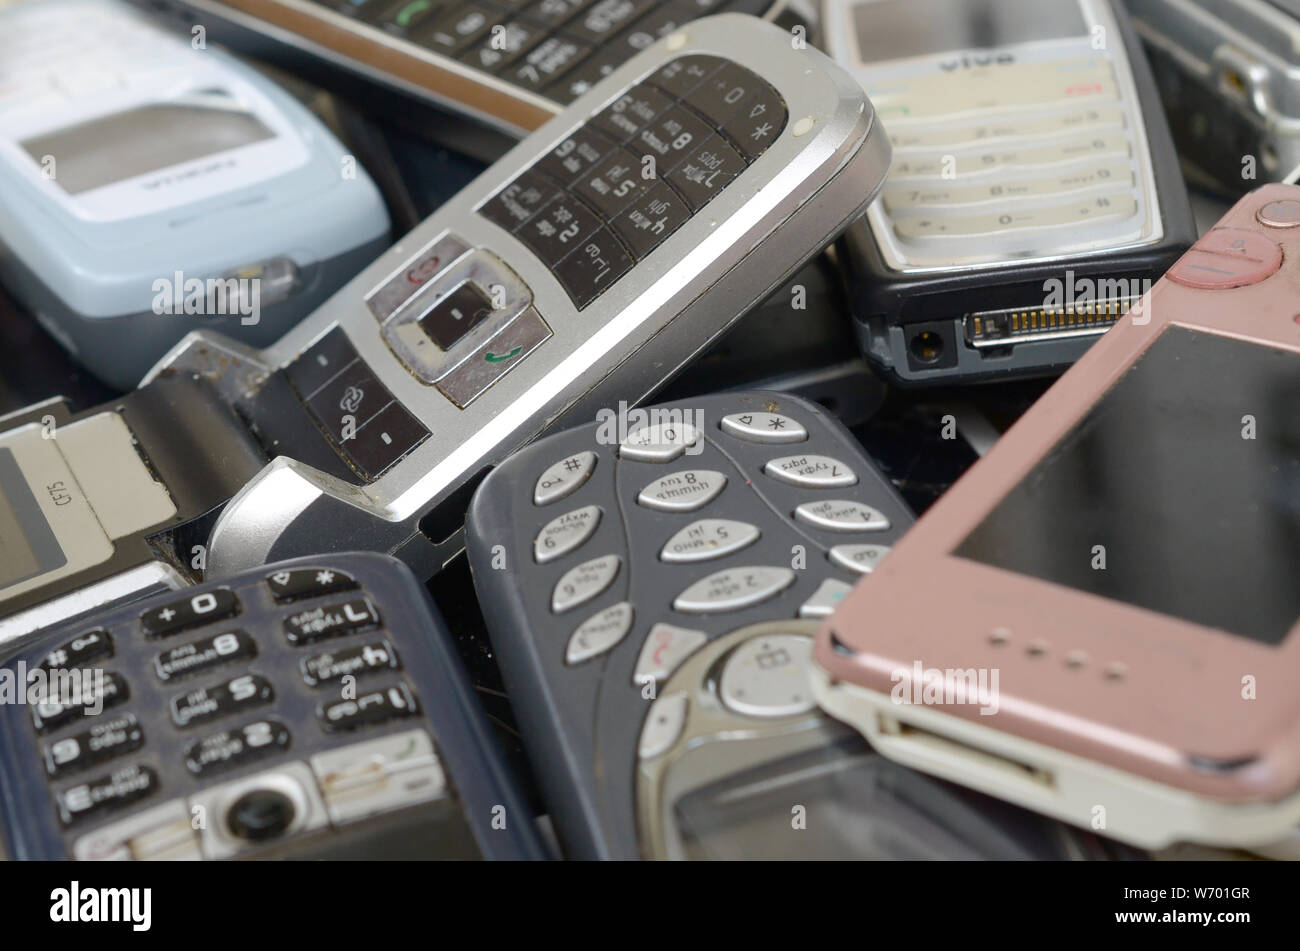 KHARKIV, UKRAINE - JULY 30, 2019: Bunch of old used outdated mobile phones. Recycling electronics of many brands was sold in the market cheap. Close u Stock Photo